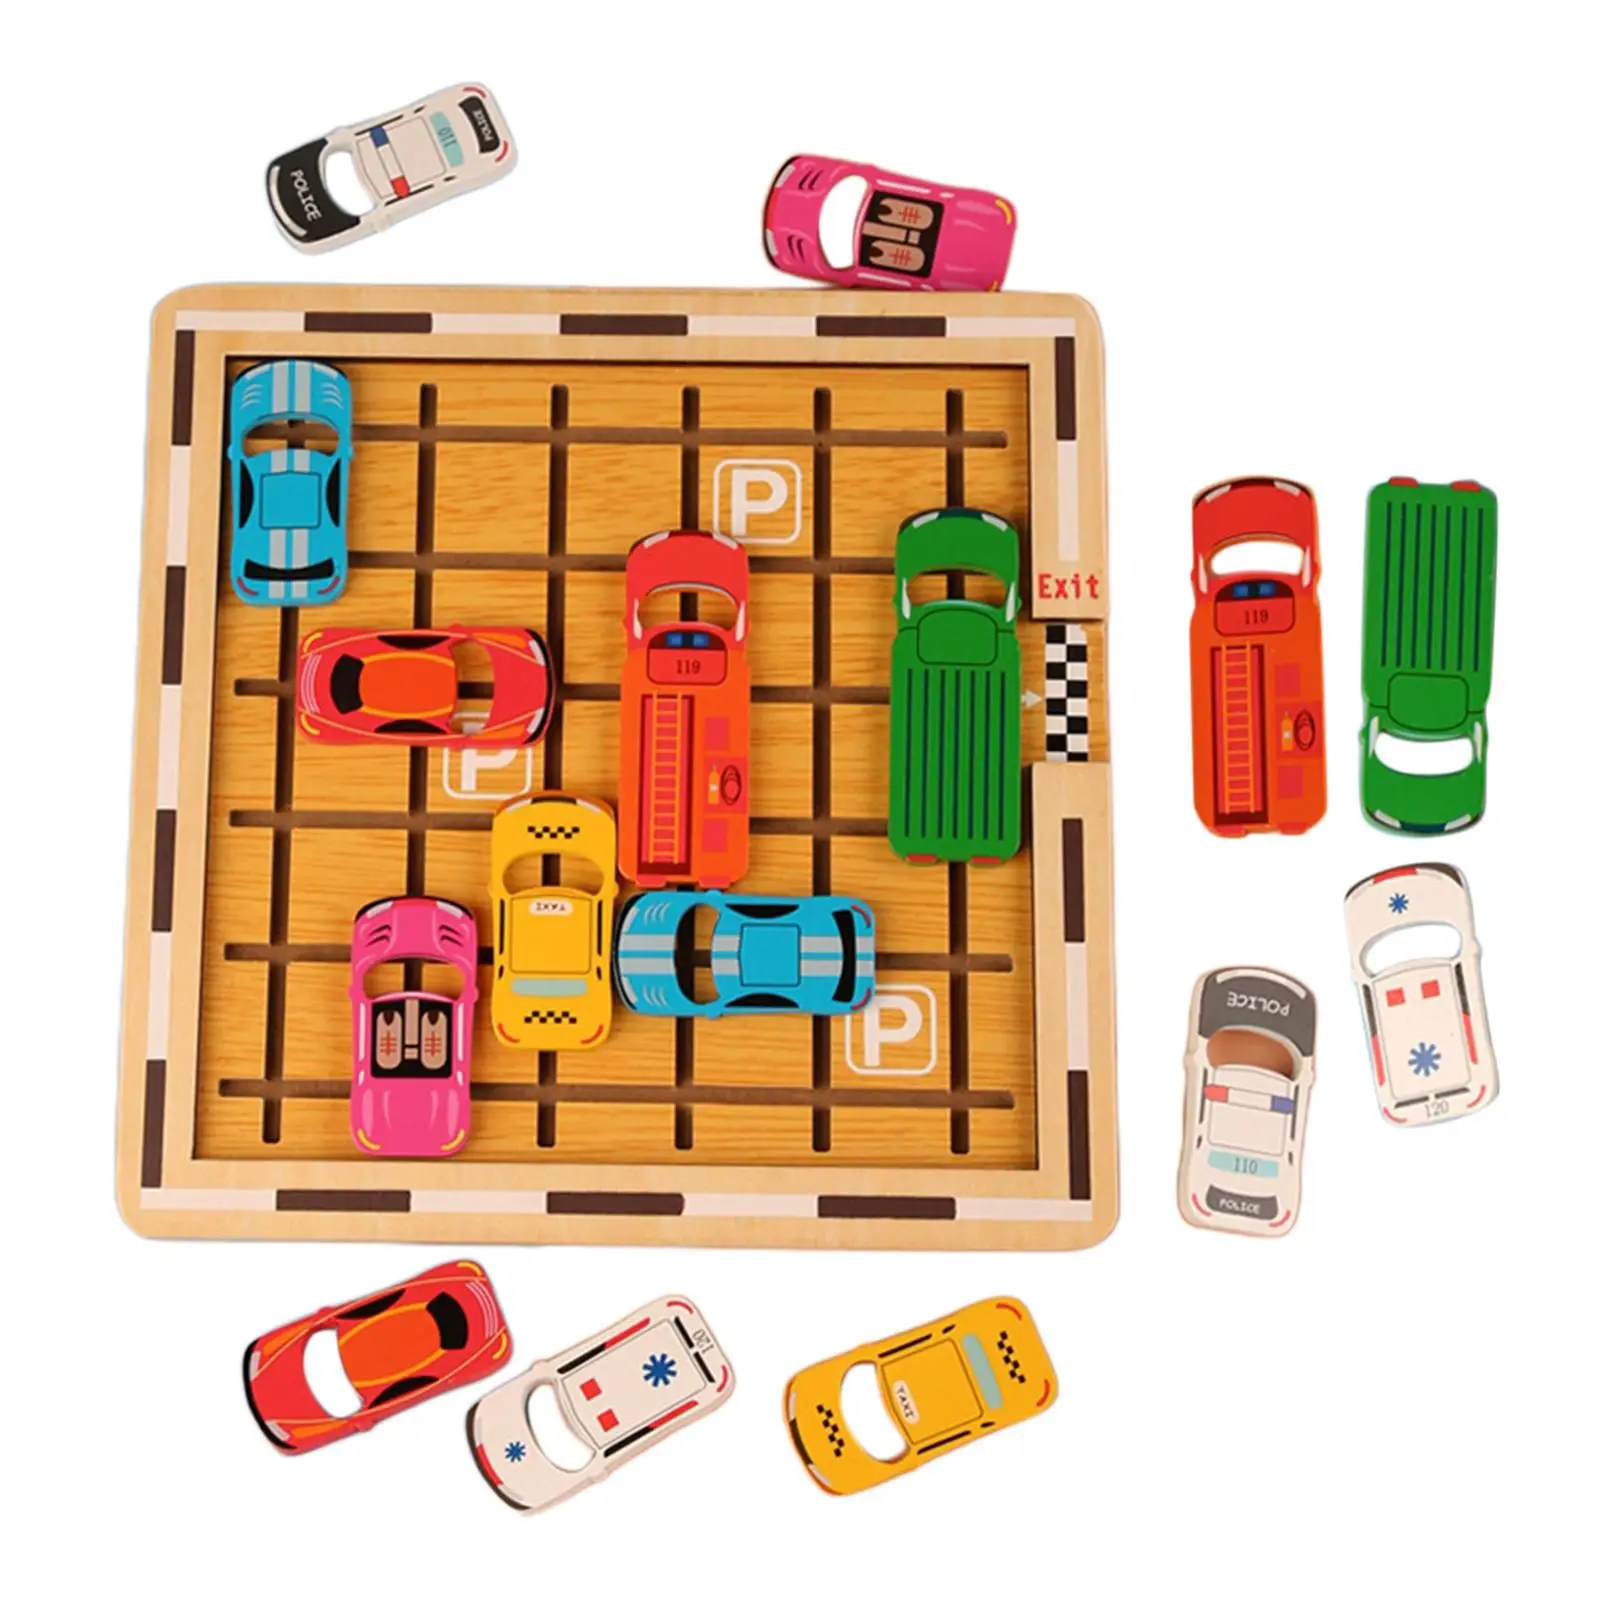 Wooden Early Education Car Sensory Toy Logical Thinking Training Exercise Brain Ability Fine Motor Skills for Boys Kids Gifts